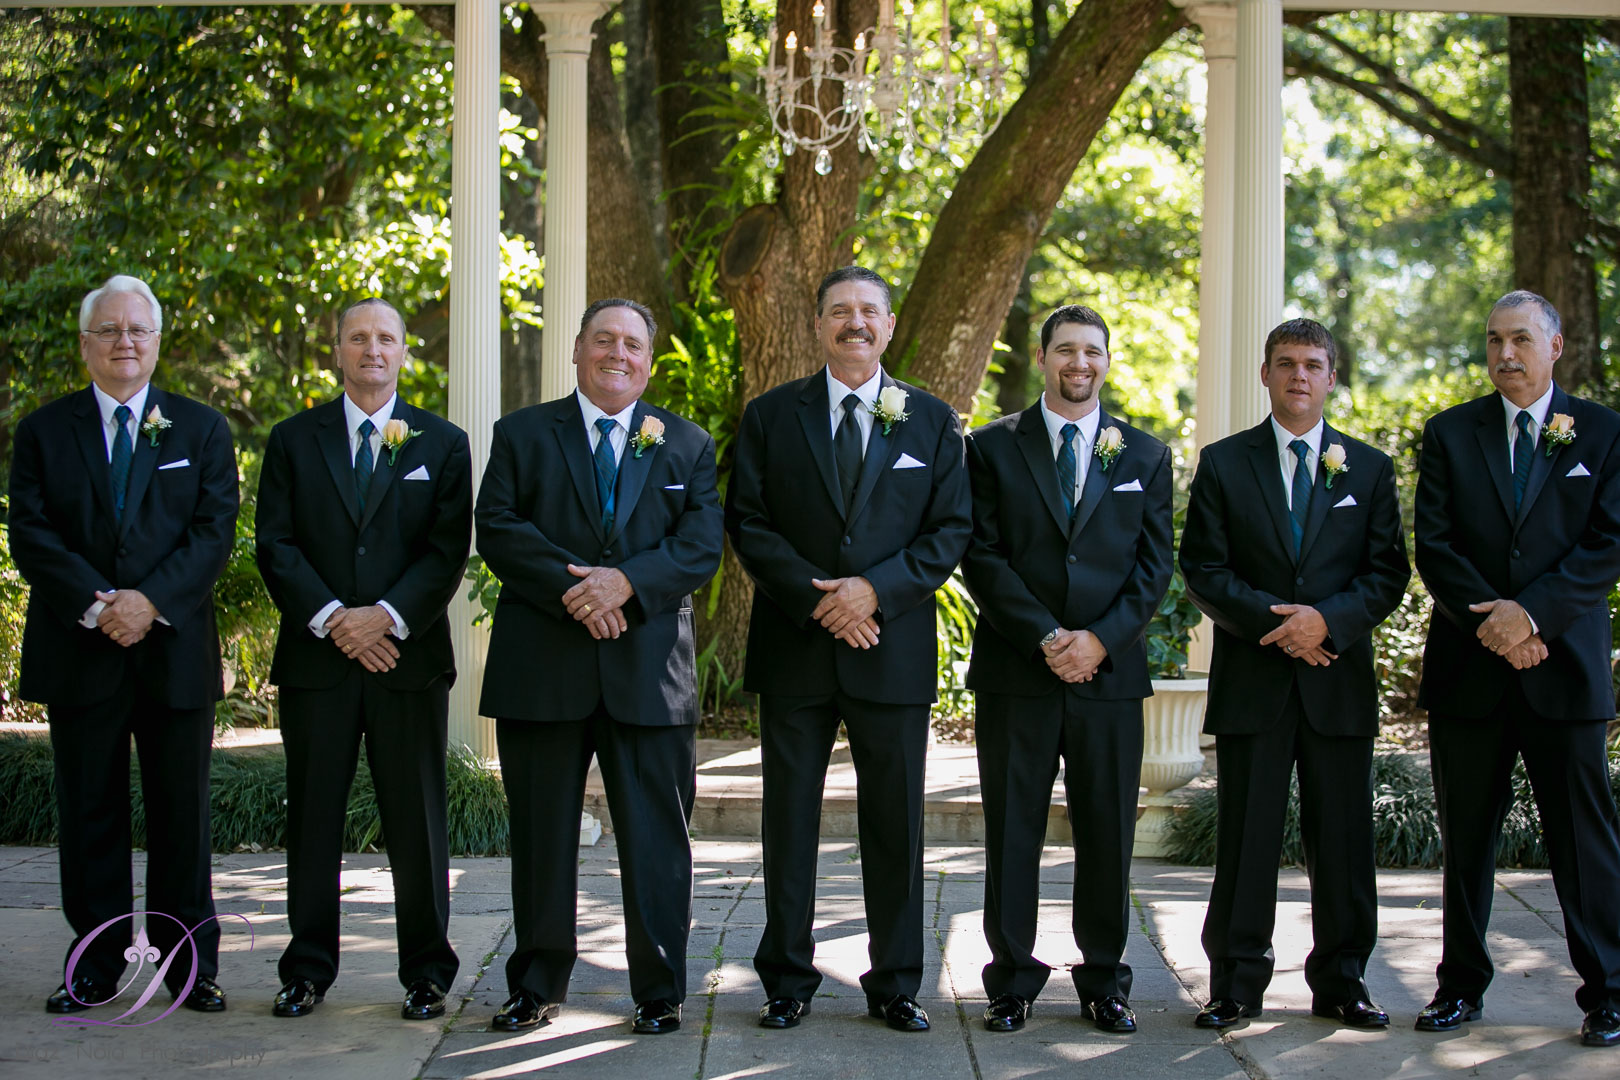 new-orleans-wedding-photography-40-of-90